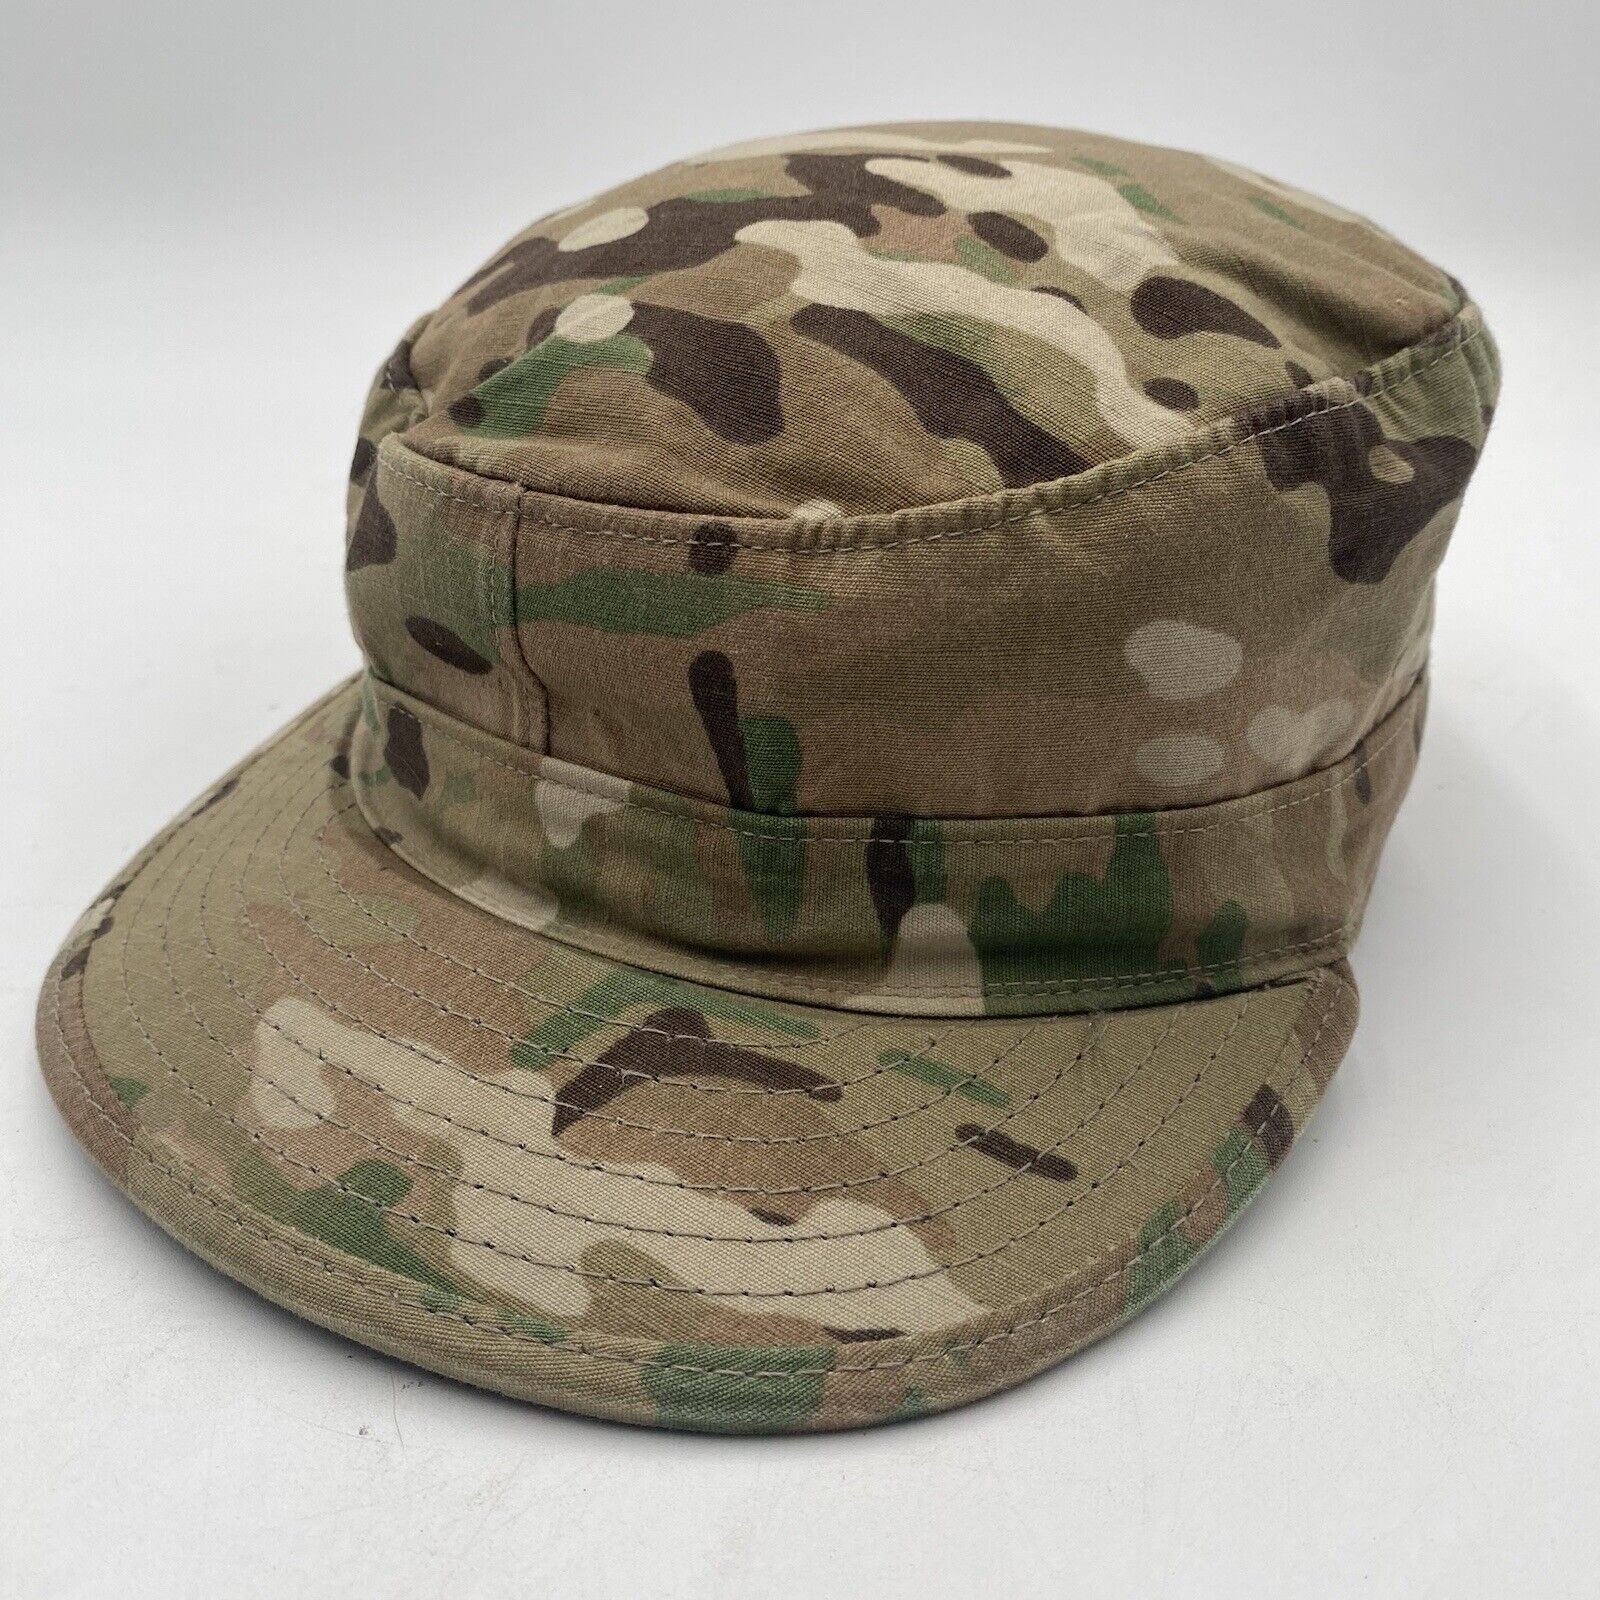 US Army OCP Patrol Cap Size 7 1/4 Military Issued NYCO Ripstop Bernard Vgc